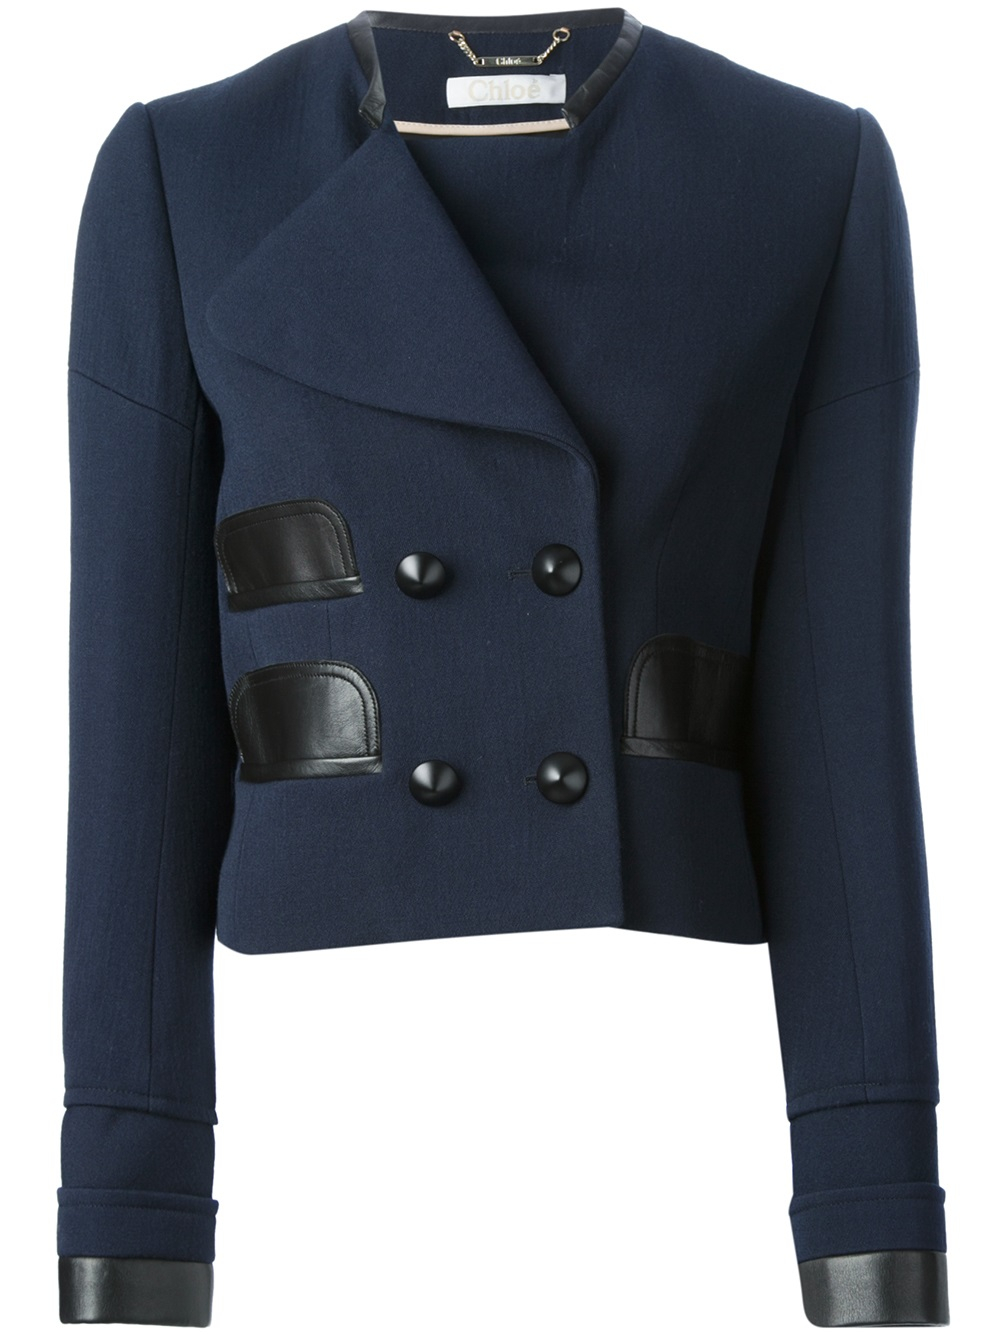 Lyst - Chloé Cropped Peacoat in Blue